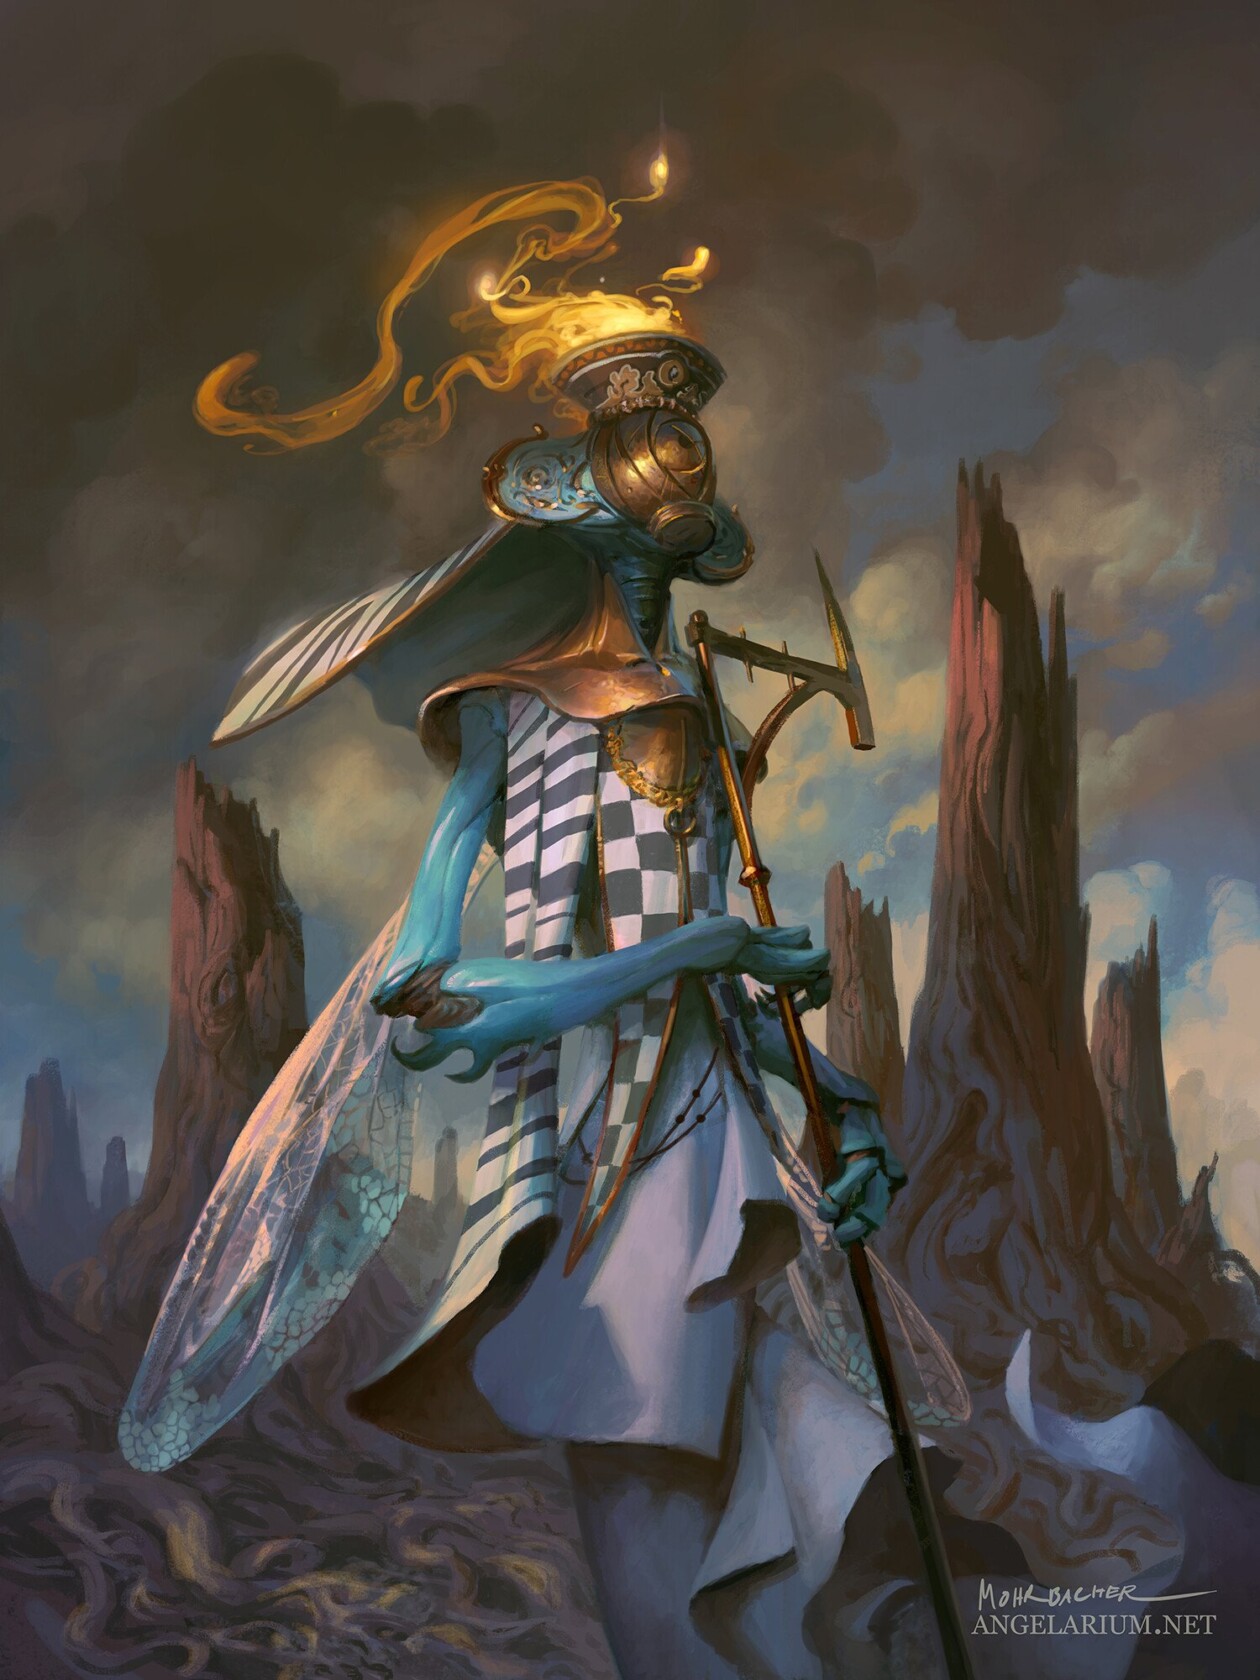 Peter Mohrbacher Blends Surrealism With Fantasy To Create Powerful Magical Beings (2)